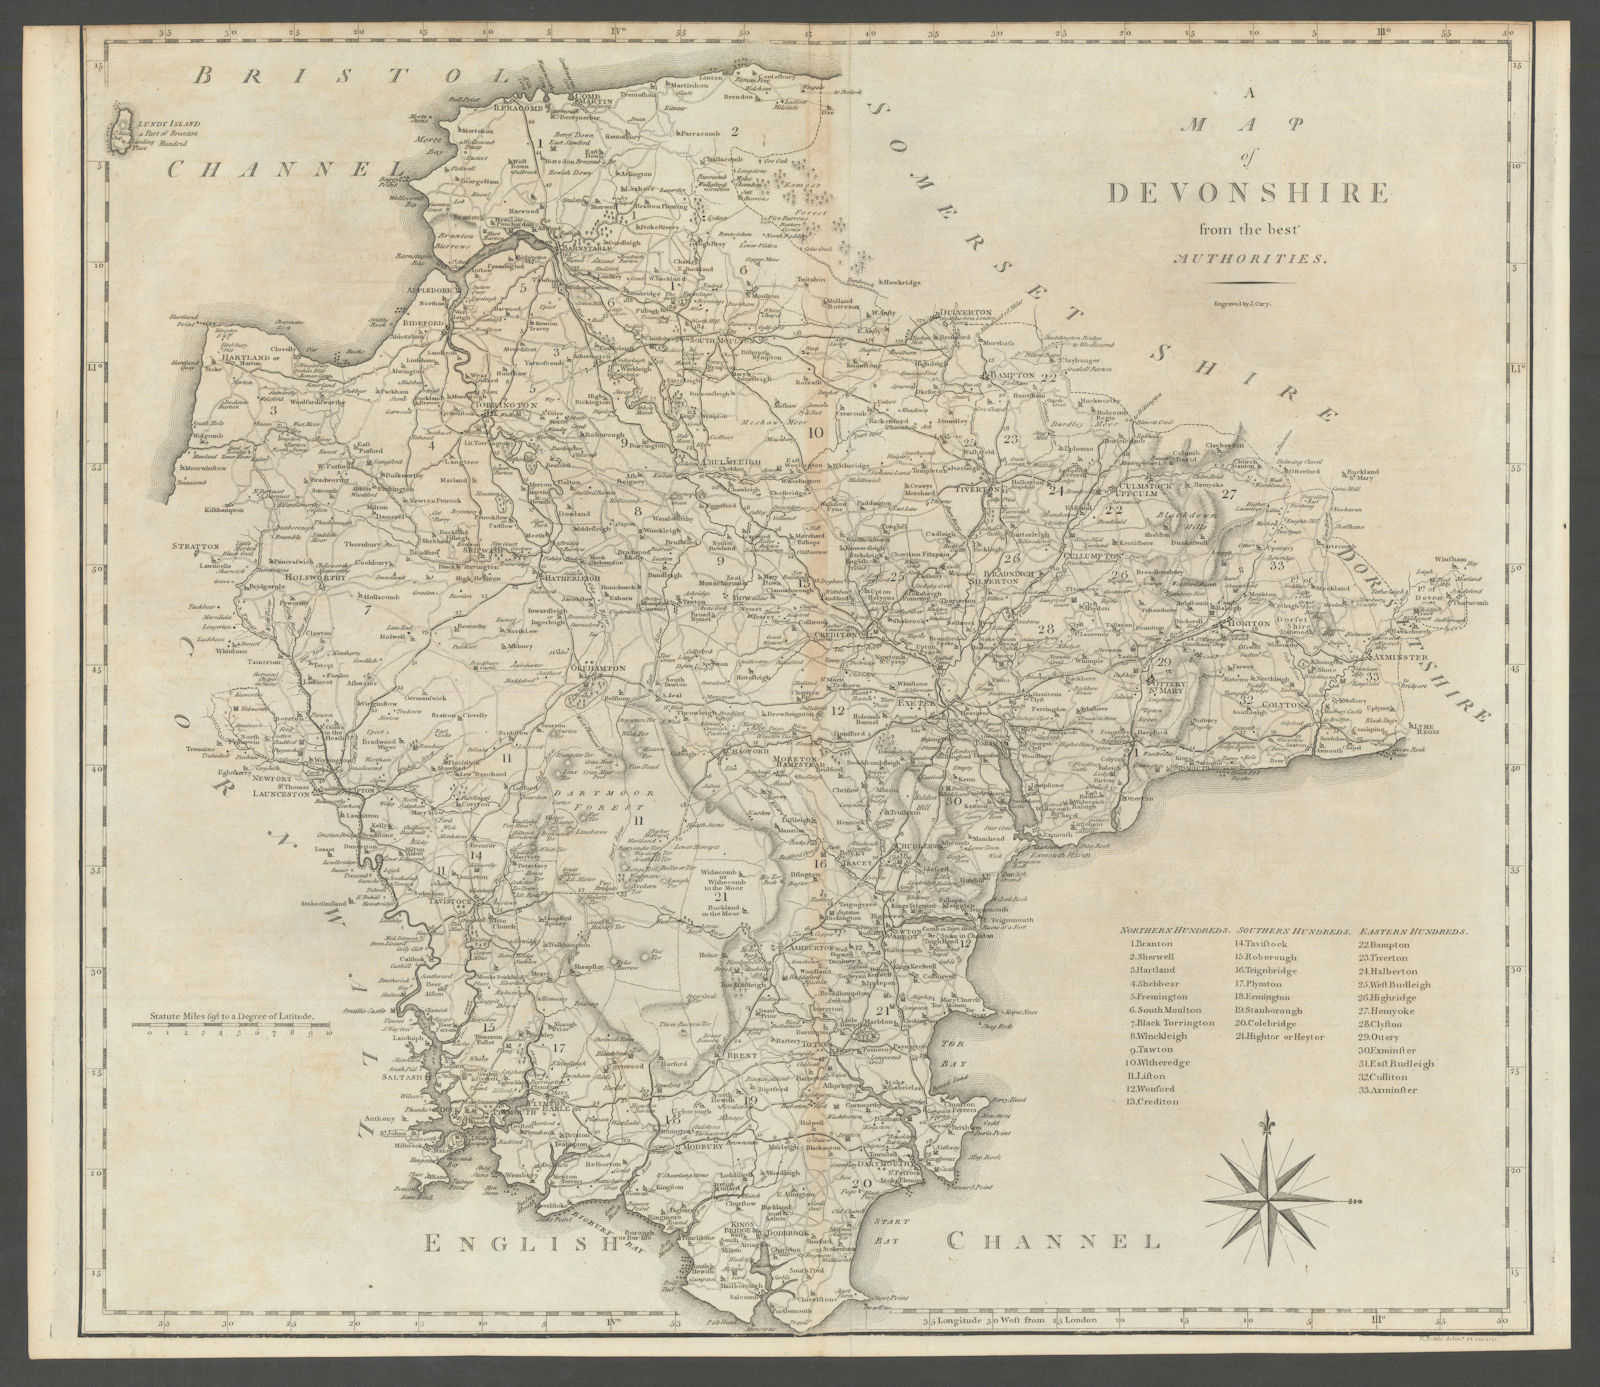 "A map of Devonshire from the best authorities". County map. CARY 1789 old